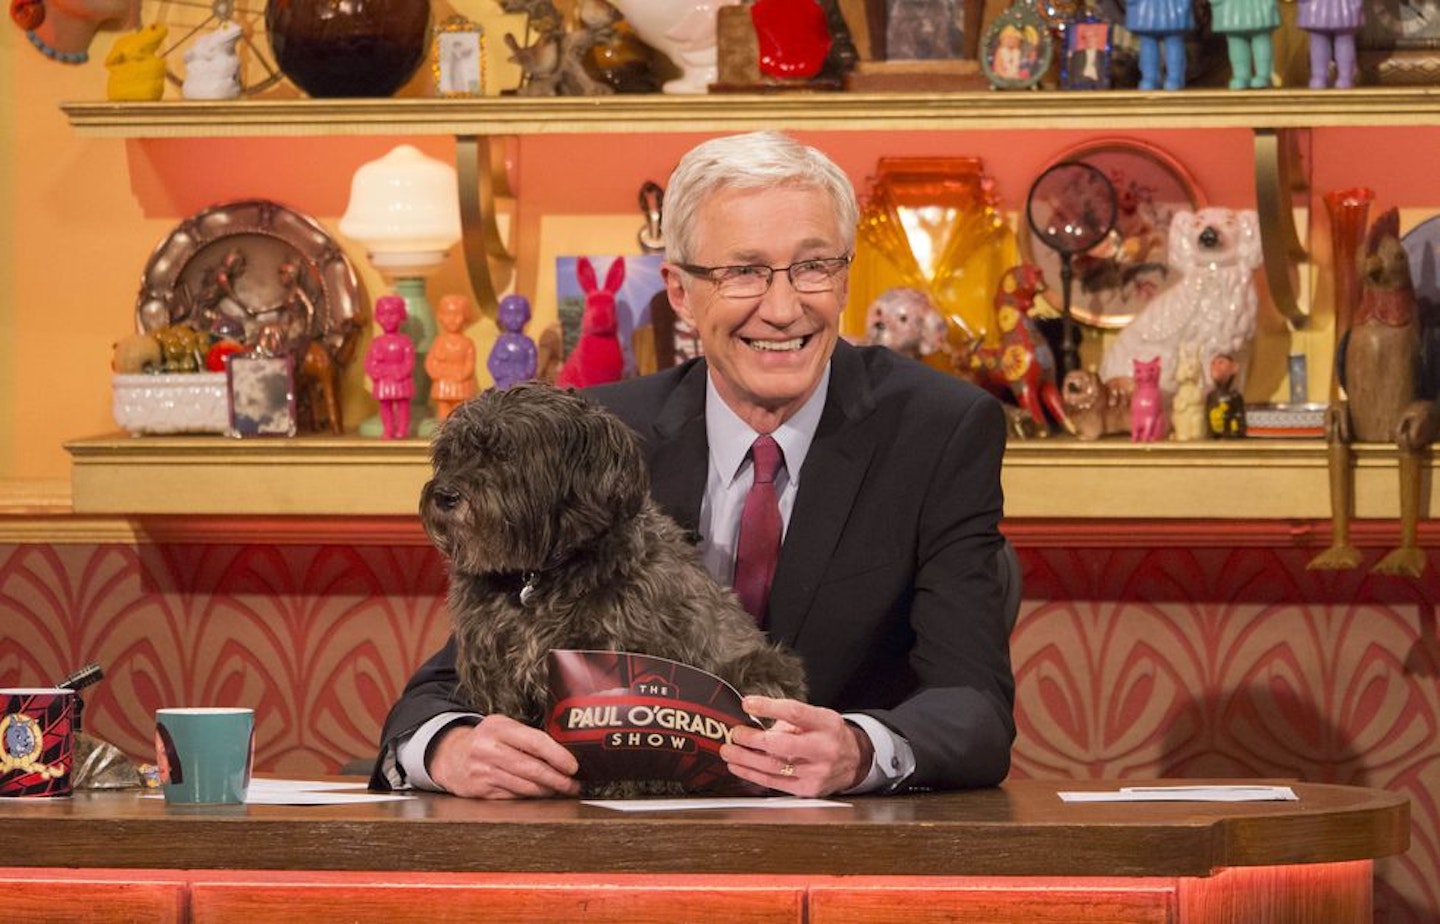 Paul O'Grady and dog on his show 